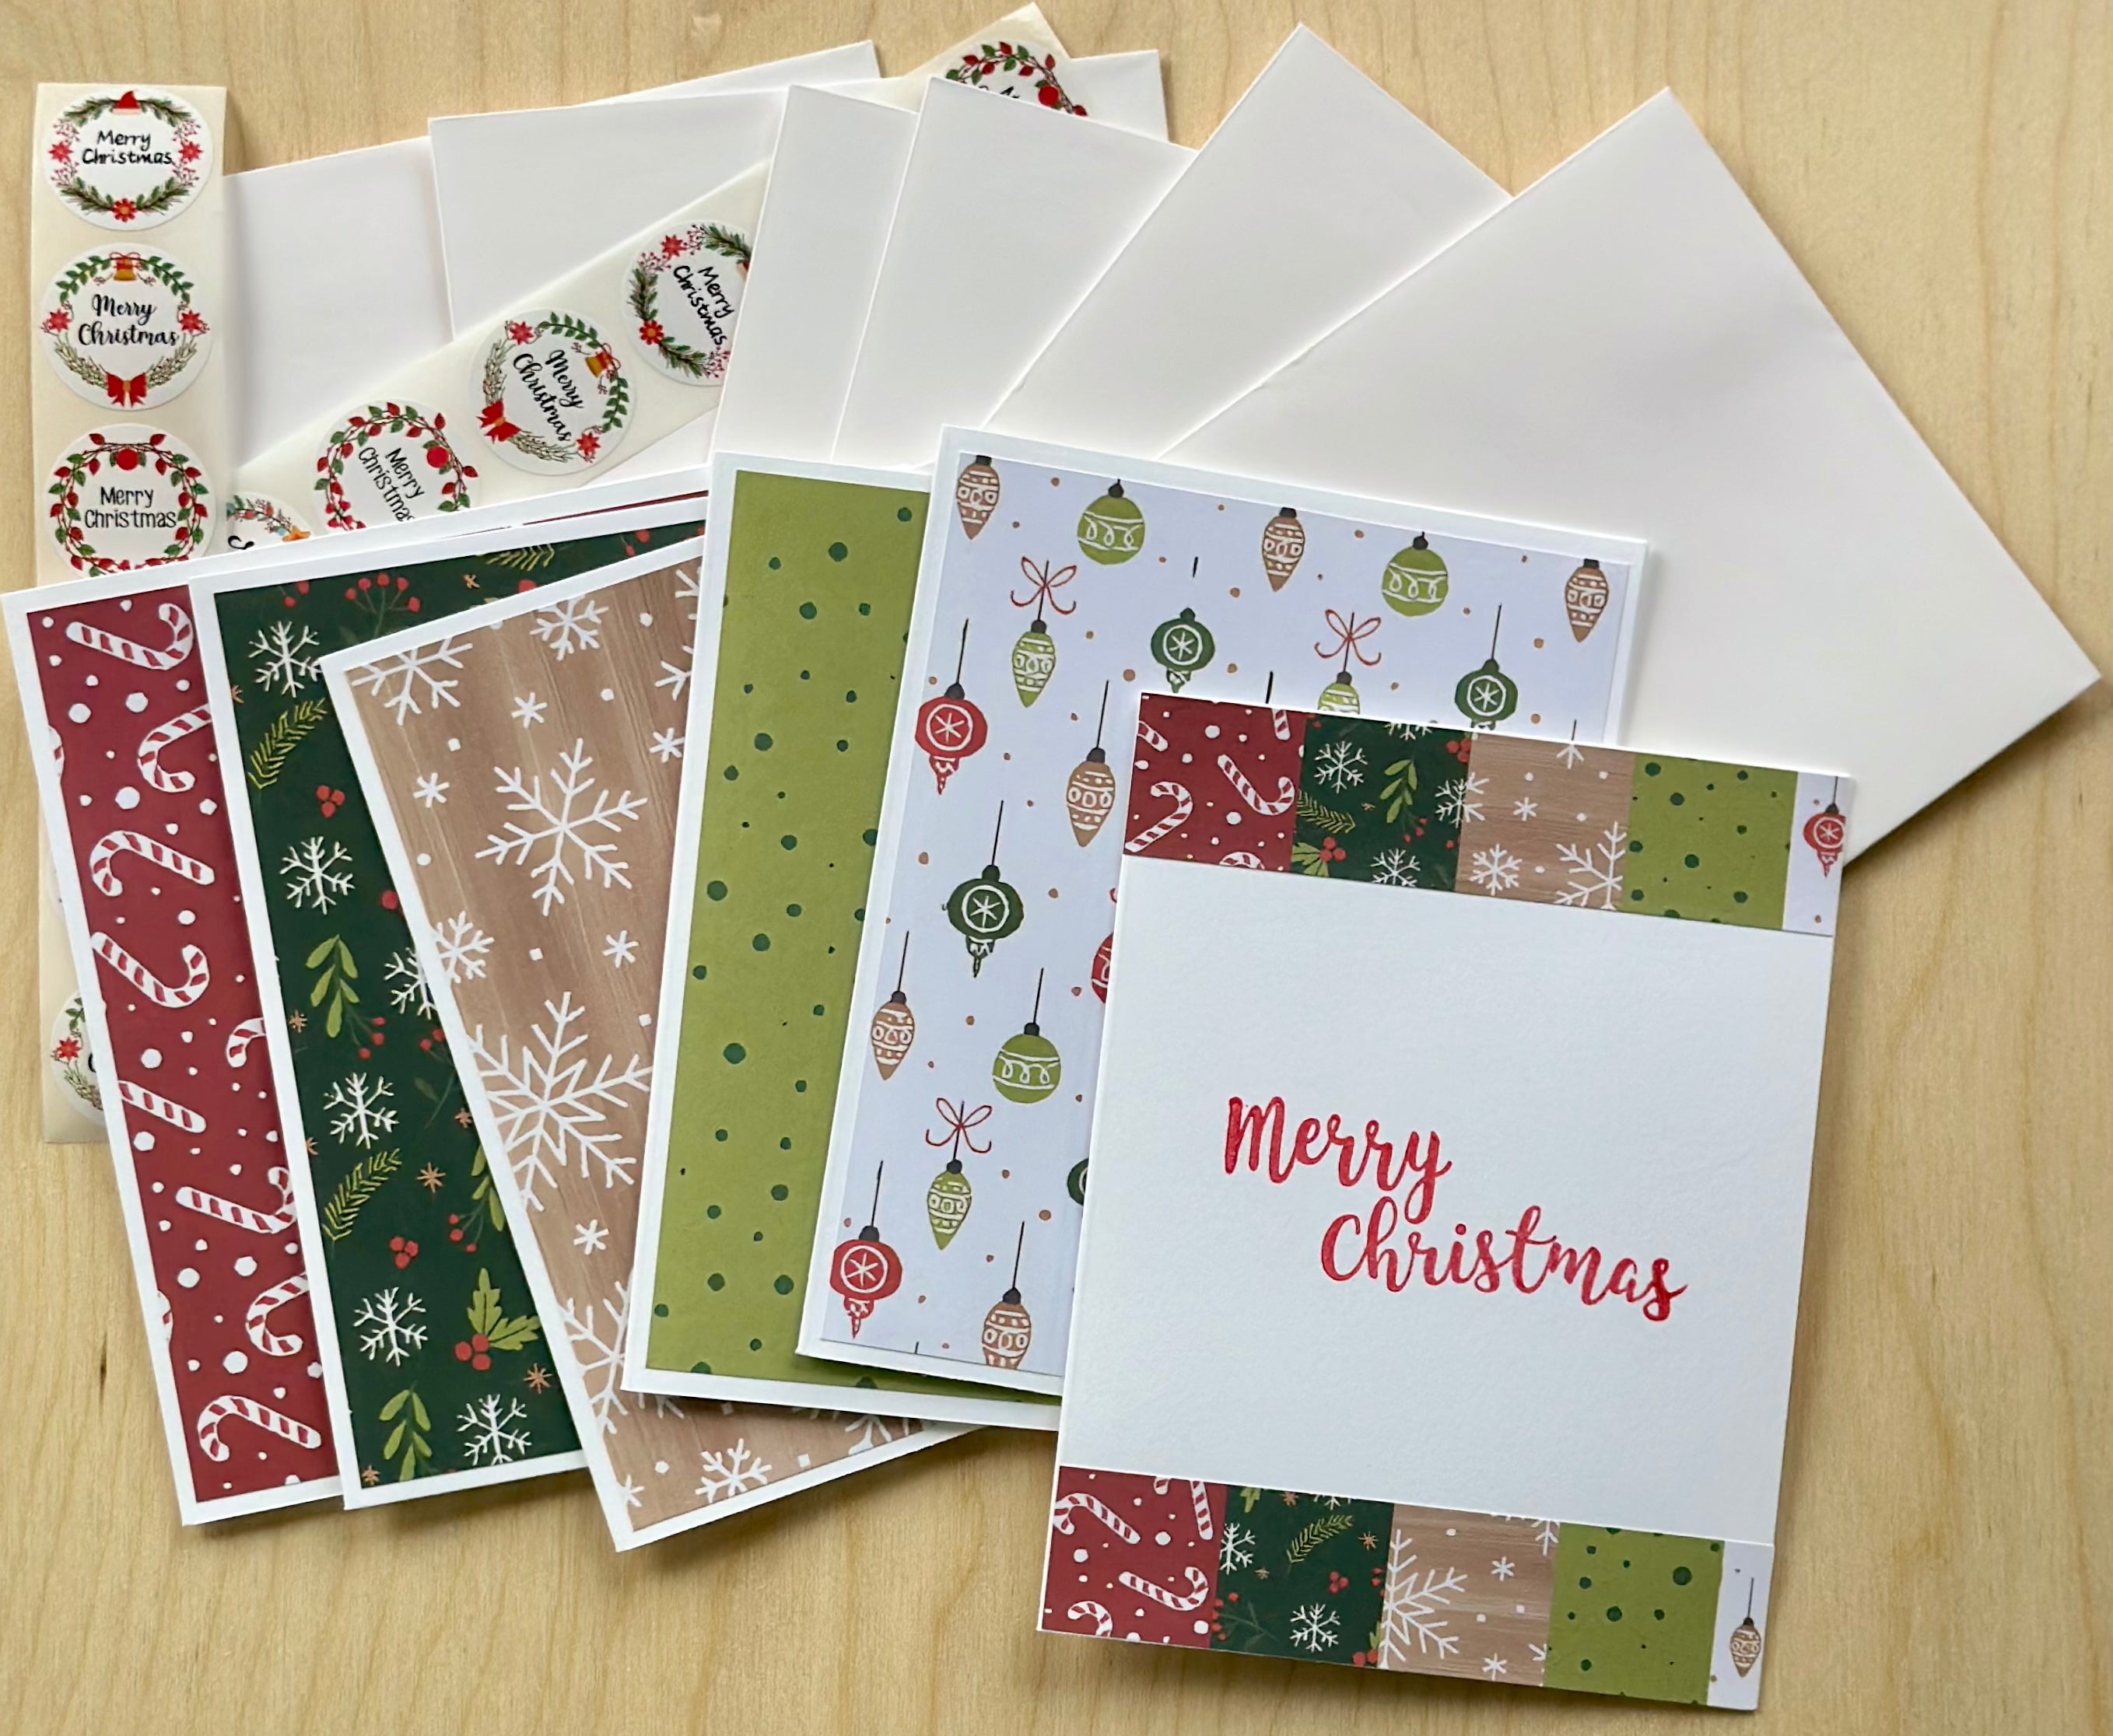 Christmas Cards | Blank Christmas Cards | Greeting Cards | Holiday Cards |Handmade Cards Sets | Set of 6 Cards | Set of 8 Cards